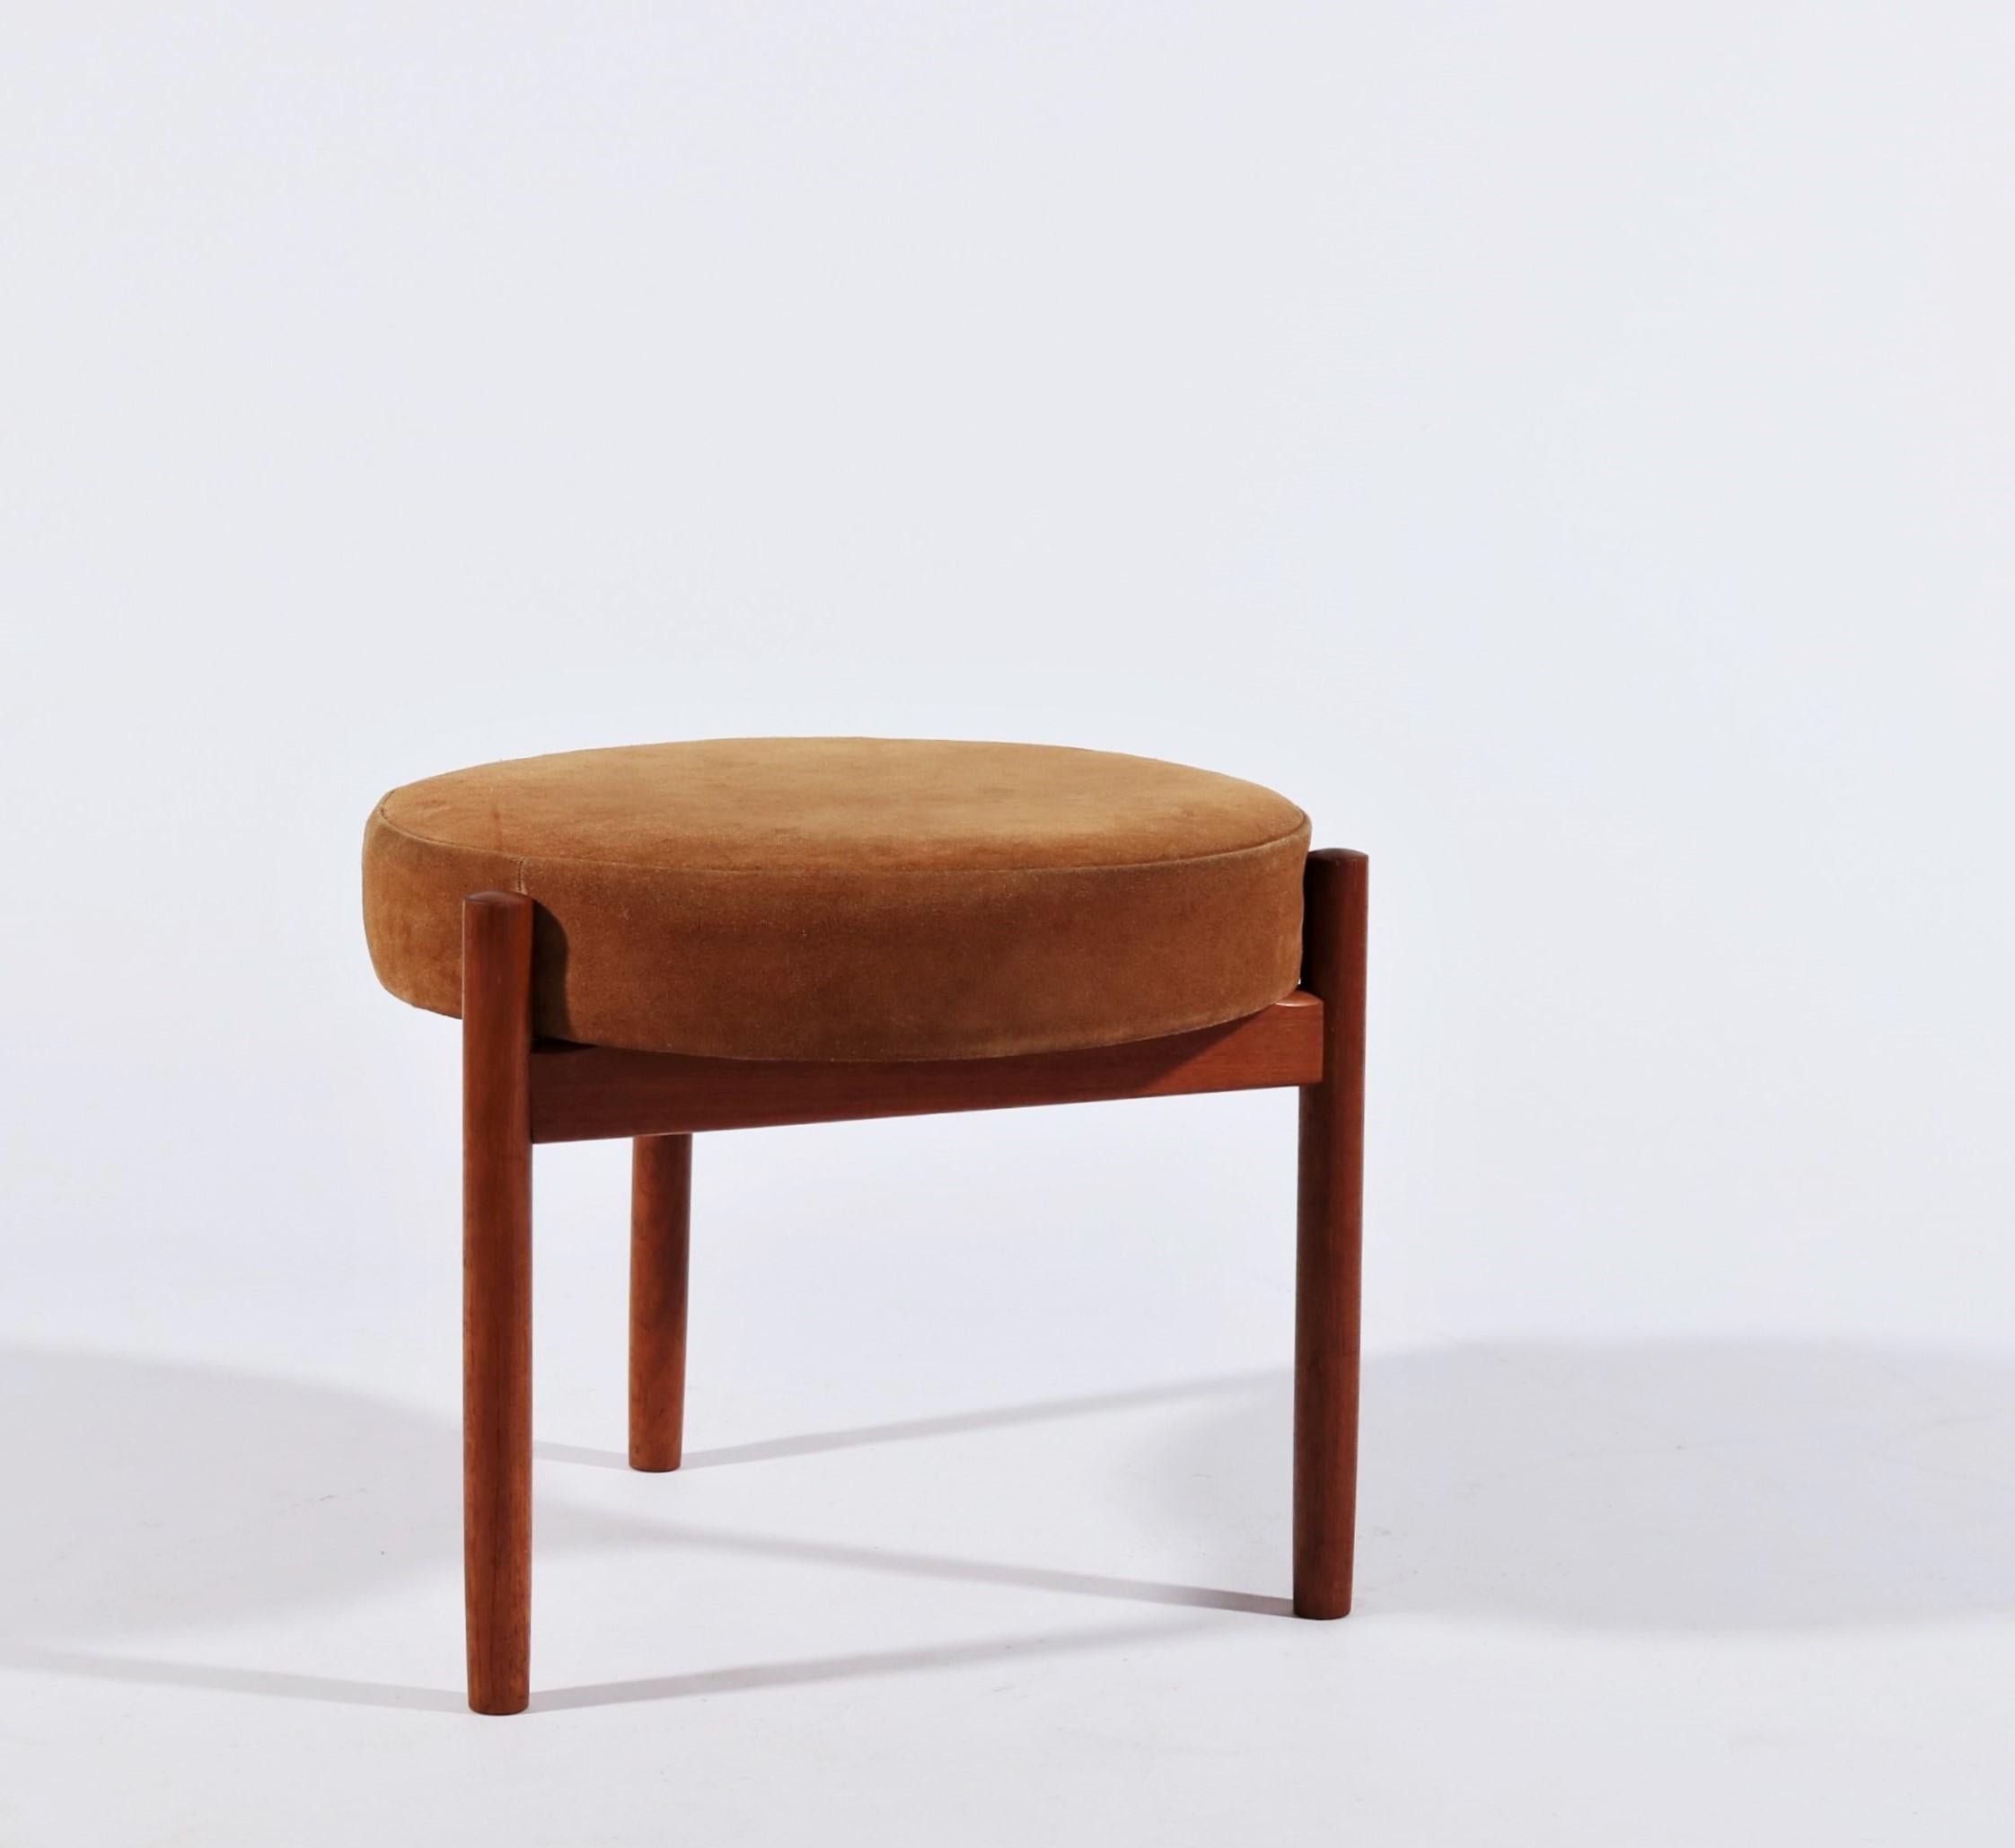 Elegant three-legged stool or ottoman designed by Hugo Frandsen for Spottrup, Denmark in 1965. The stool has a teak wood frame and seat cushion with original burnt orange / brown suede upholstery in good vintage condition. Stamped with makers mark